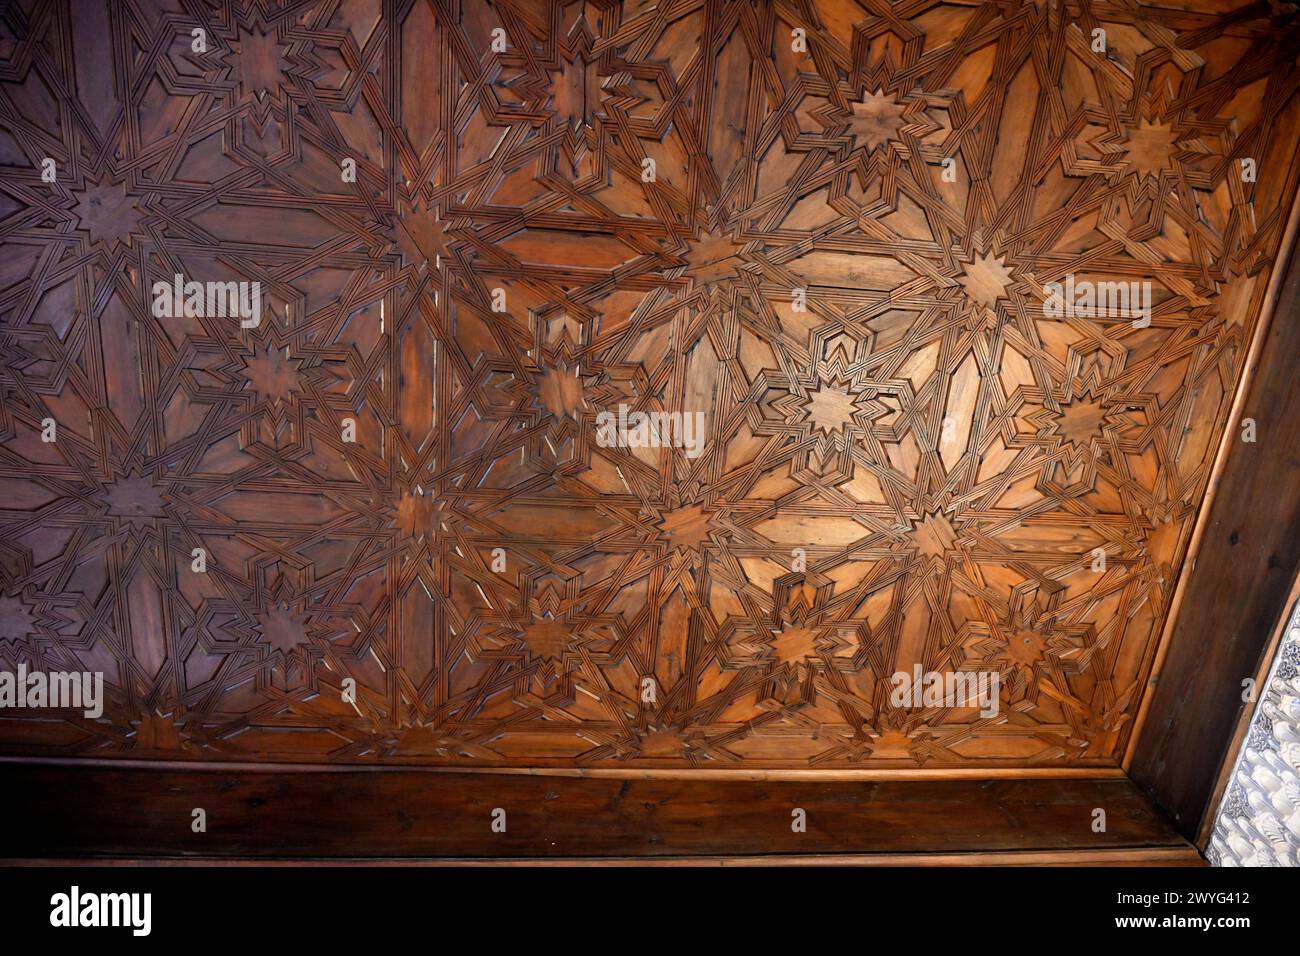 Ornate wooden ceiling in the Nasrid Palace Alhambra, Opulent Moorish-style of  Alhambra UNESCO world heritage site Granada, Andalusia, Spain Stock Photo